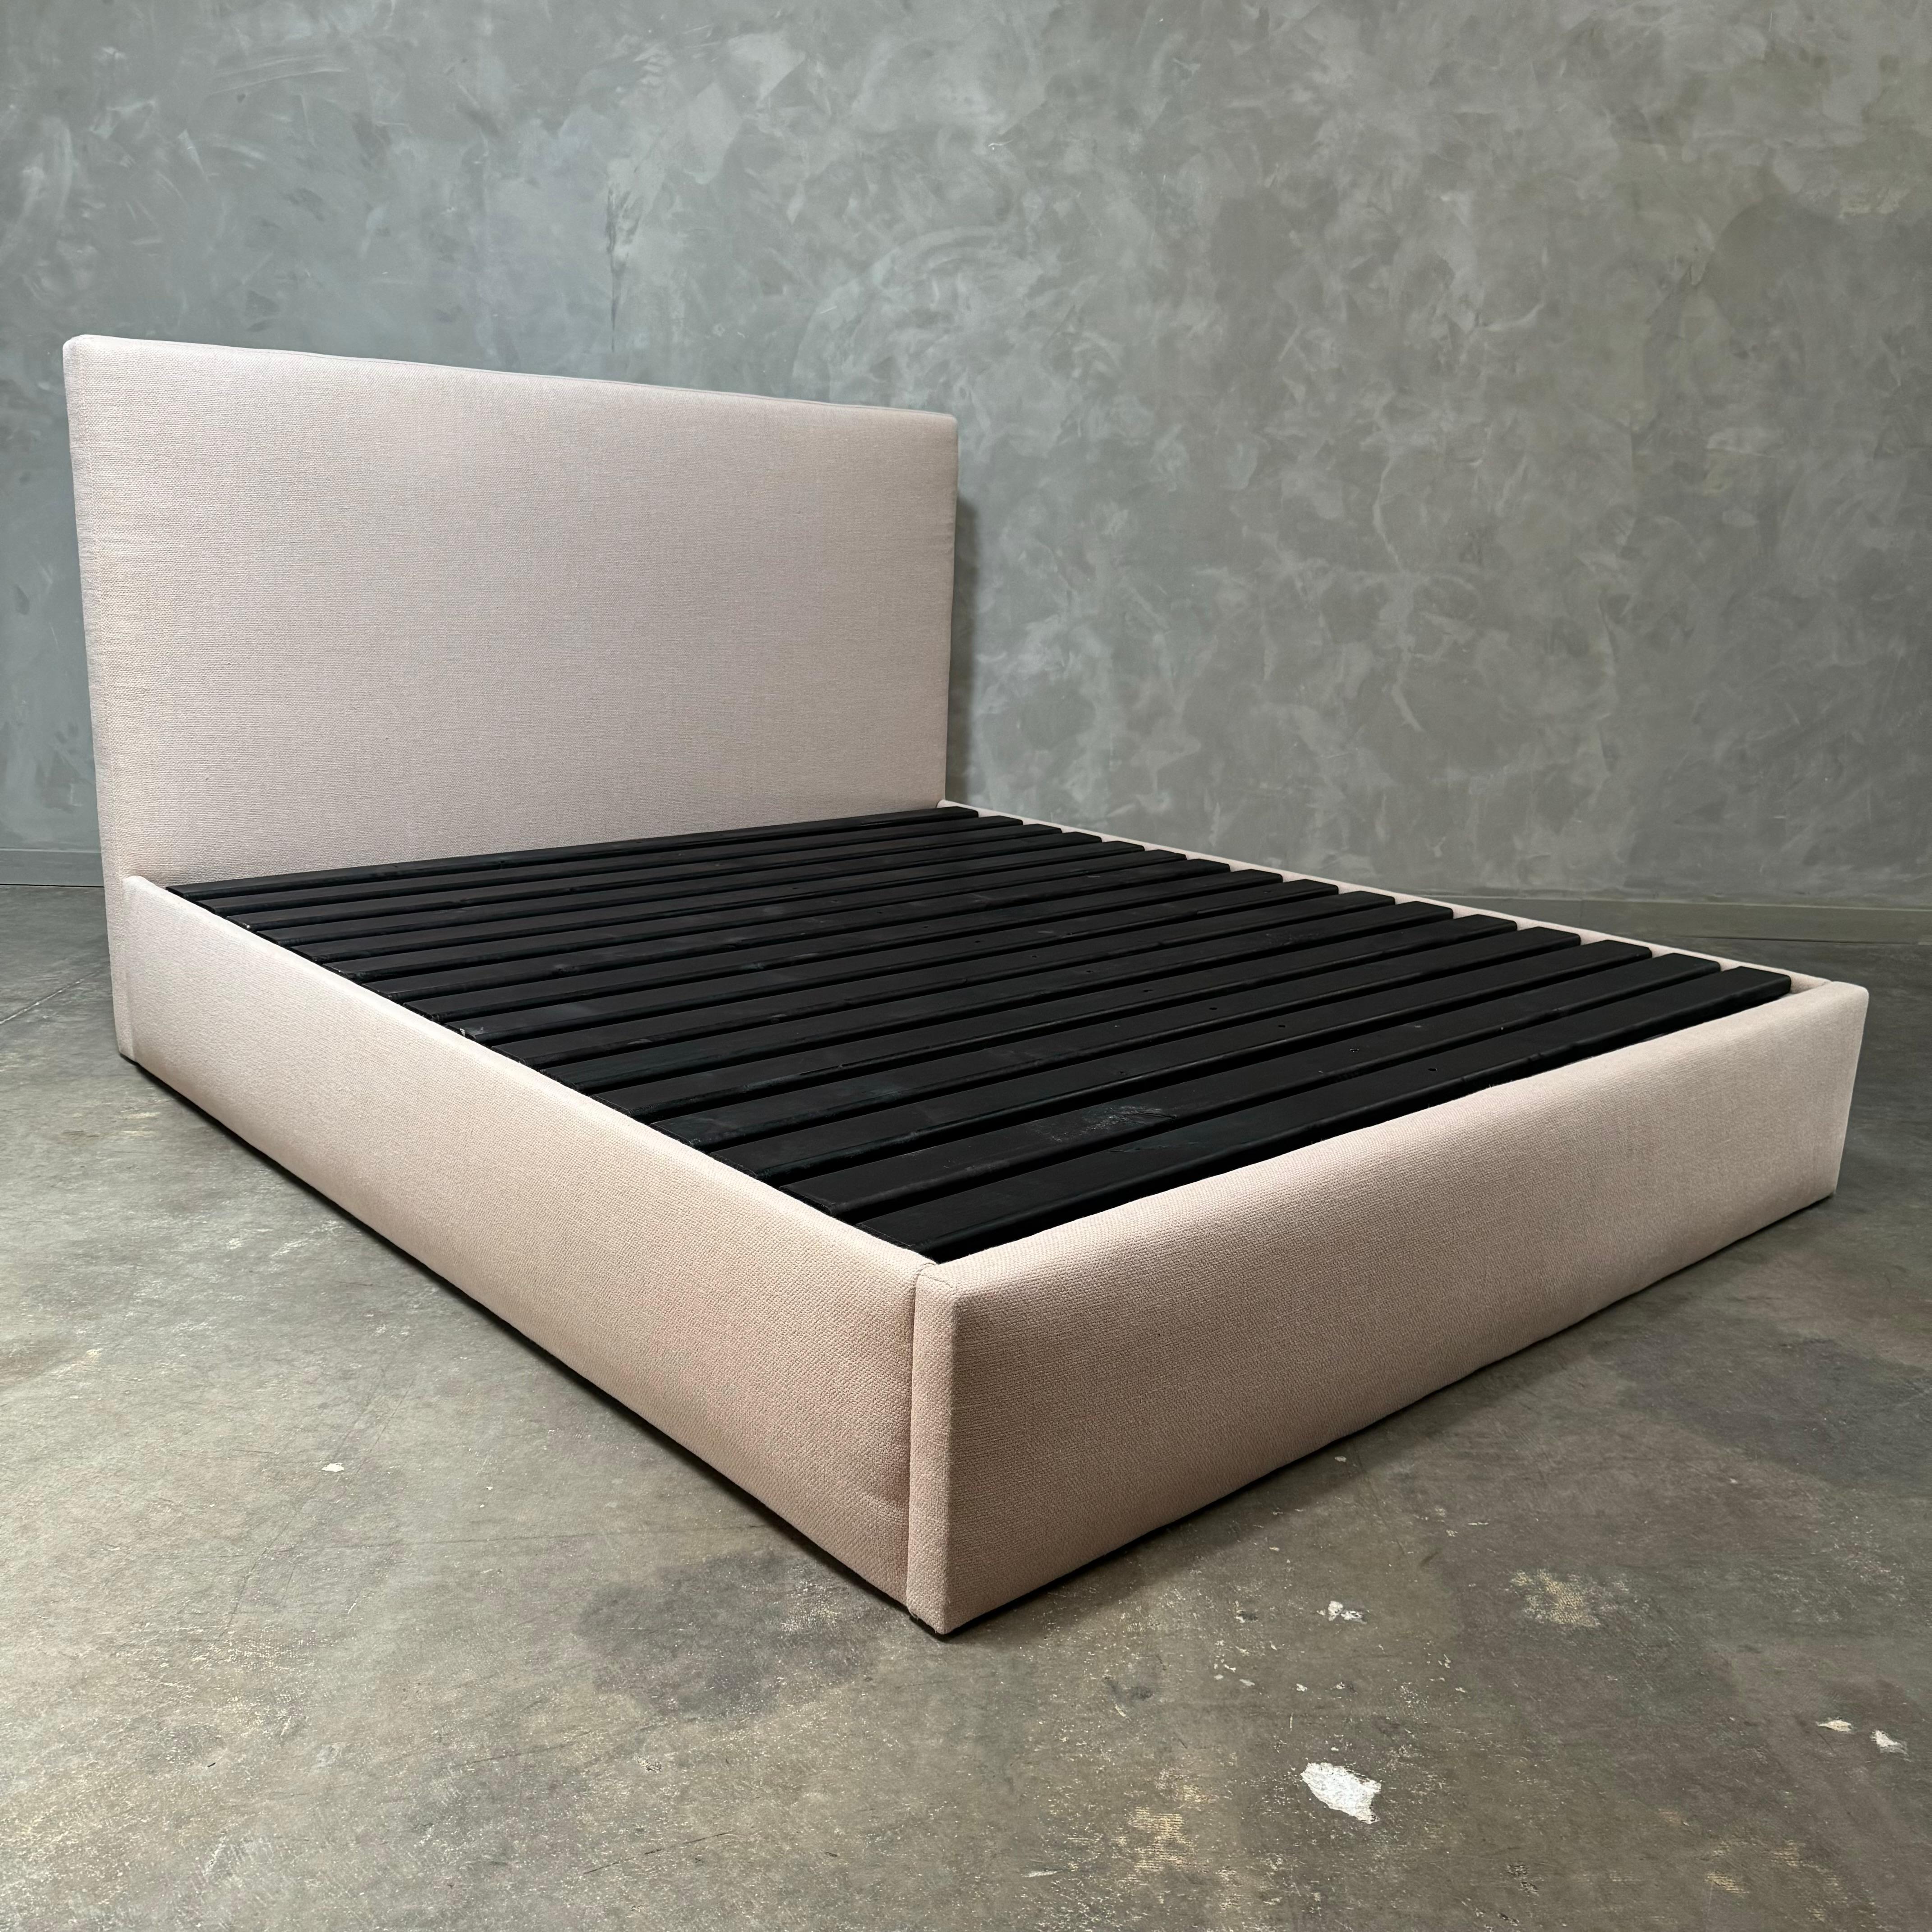 Distinguished by crisp lines and smooth contours, this platform bed is a non-tufted panel bed. Our non-tufted panel style is anchored by a luxuriously upholstered headboard. The fully-upholstered bed in luxurious Nude colored linen is made to fit